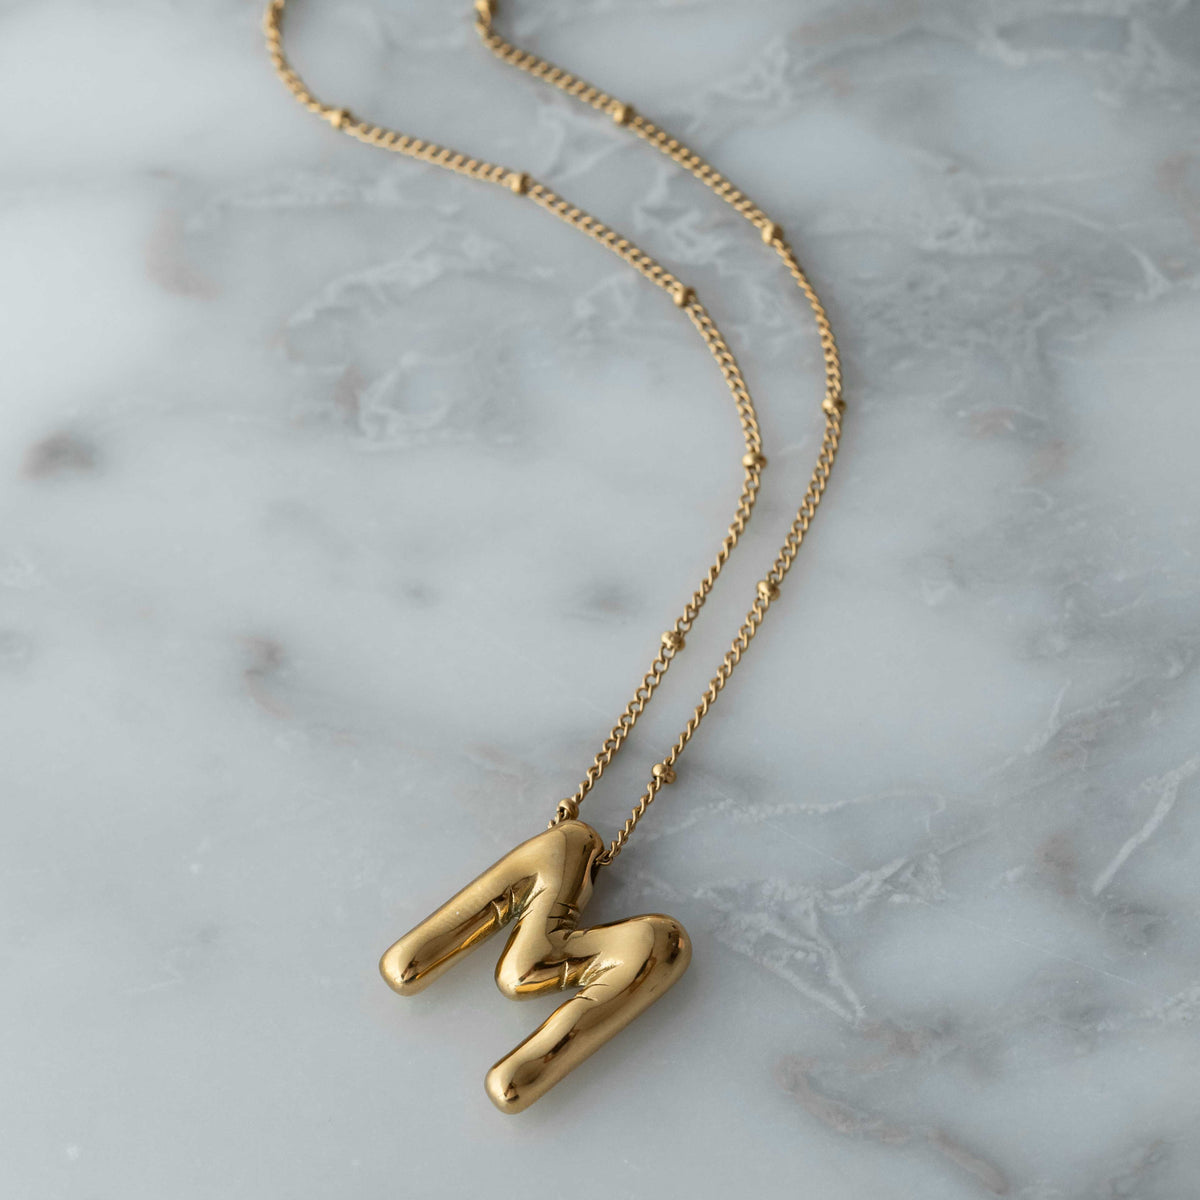 Bohomoon Stainless Steel Zara Initial Necklace